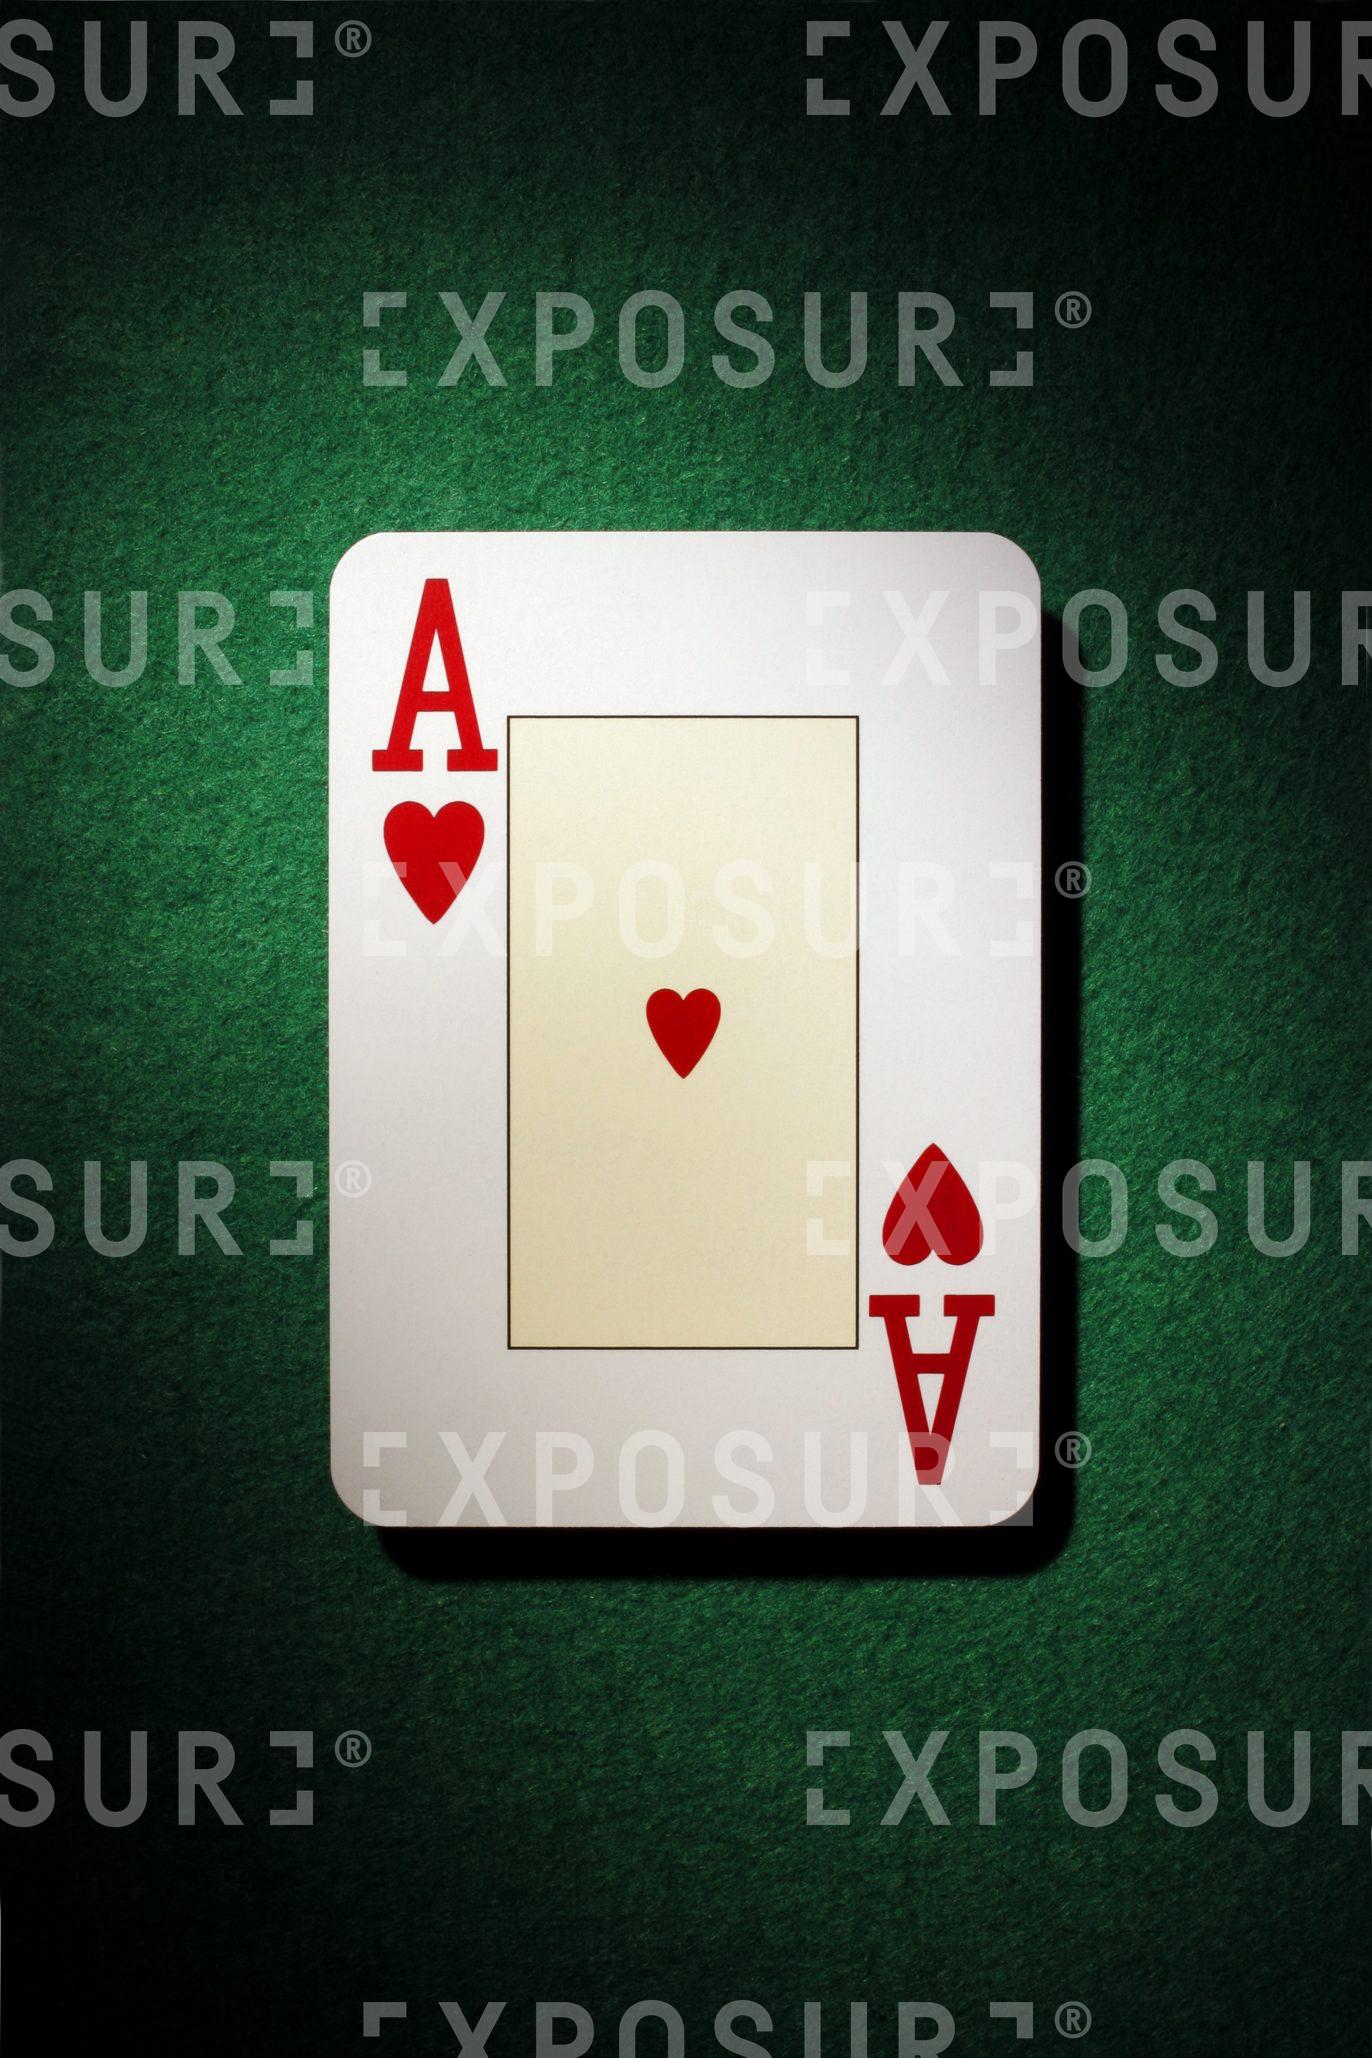 Ace of hearts, playing card